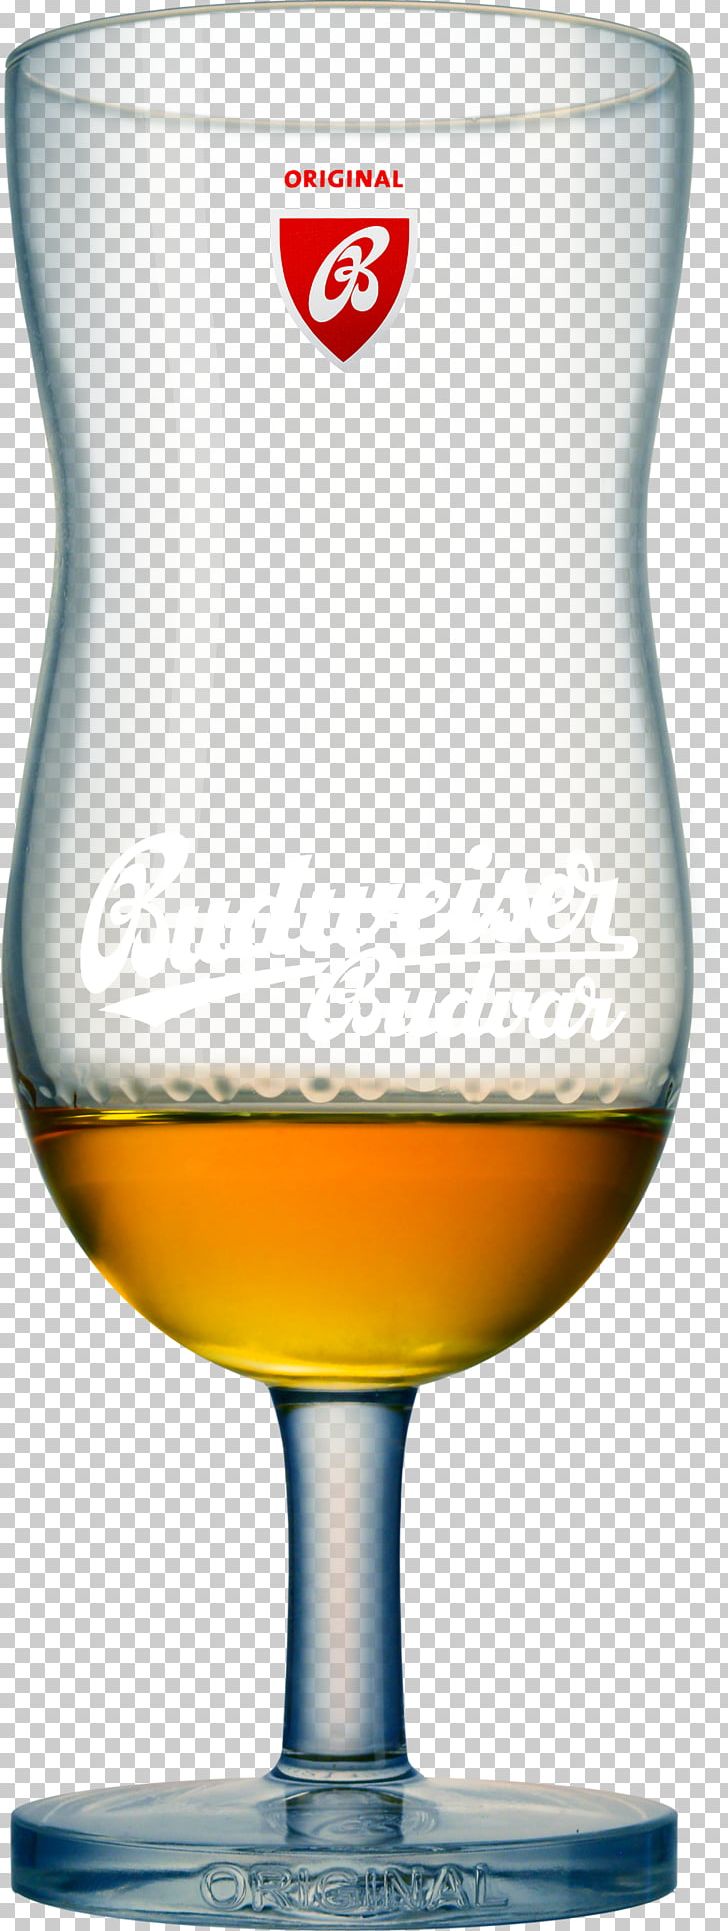 Wine Glass Beer Snifter Old Fashioned Glass PNG, Clipart, Barware, Beer, Beer Glass, Beer Glasses, Champagne Glass Free PNG Download